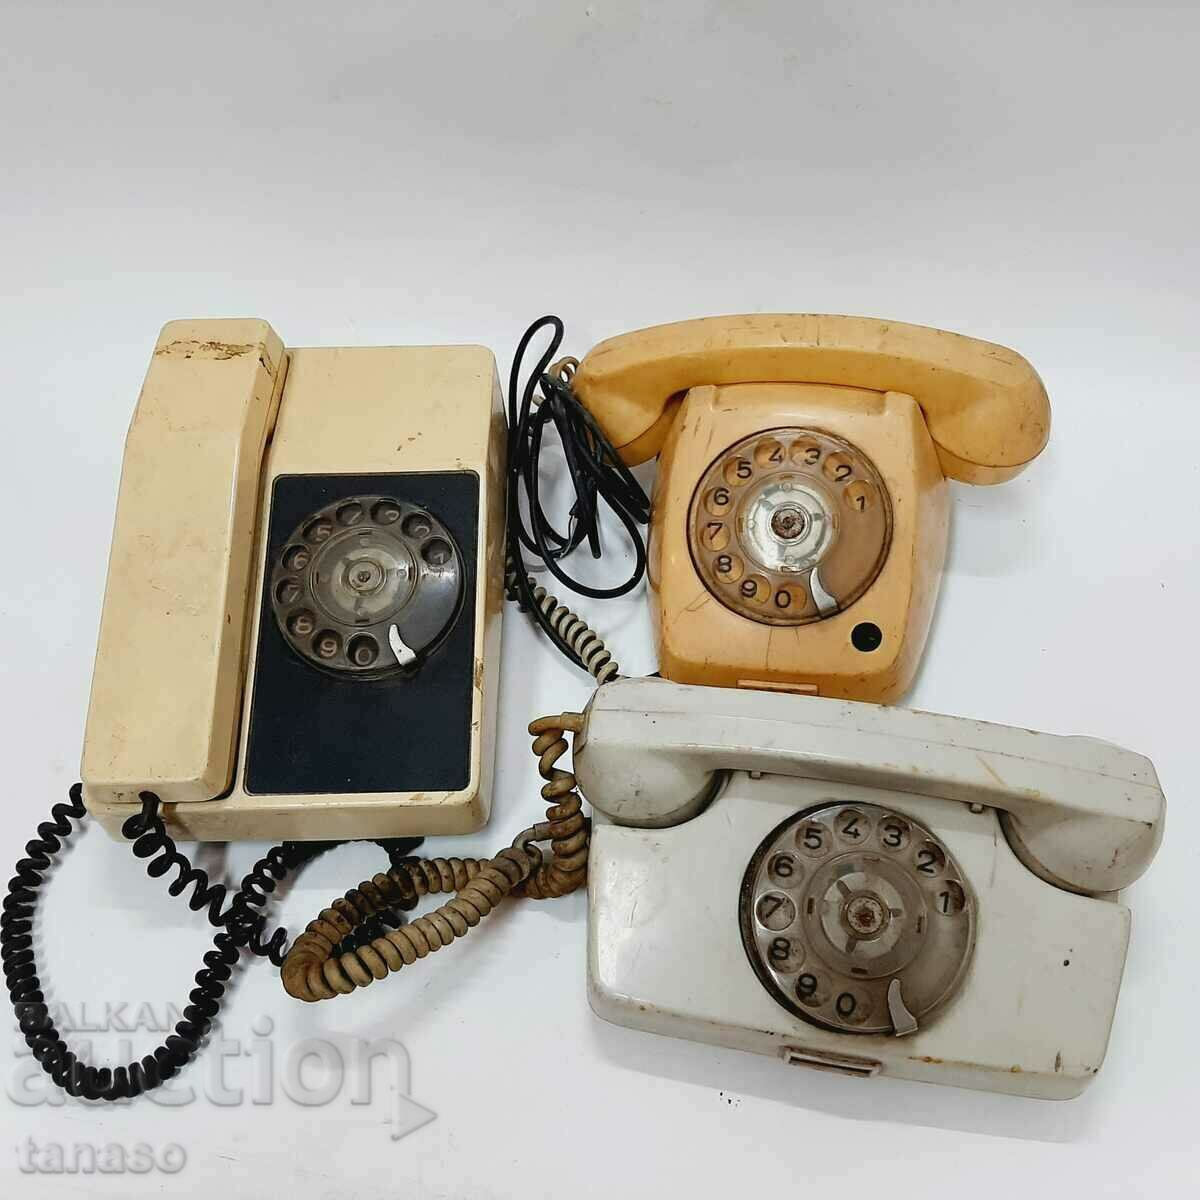 THREE OLD SOCIAL PHONES WITH WASHER(7.5)